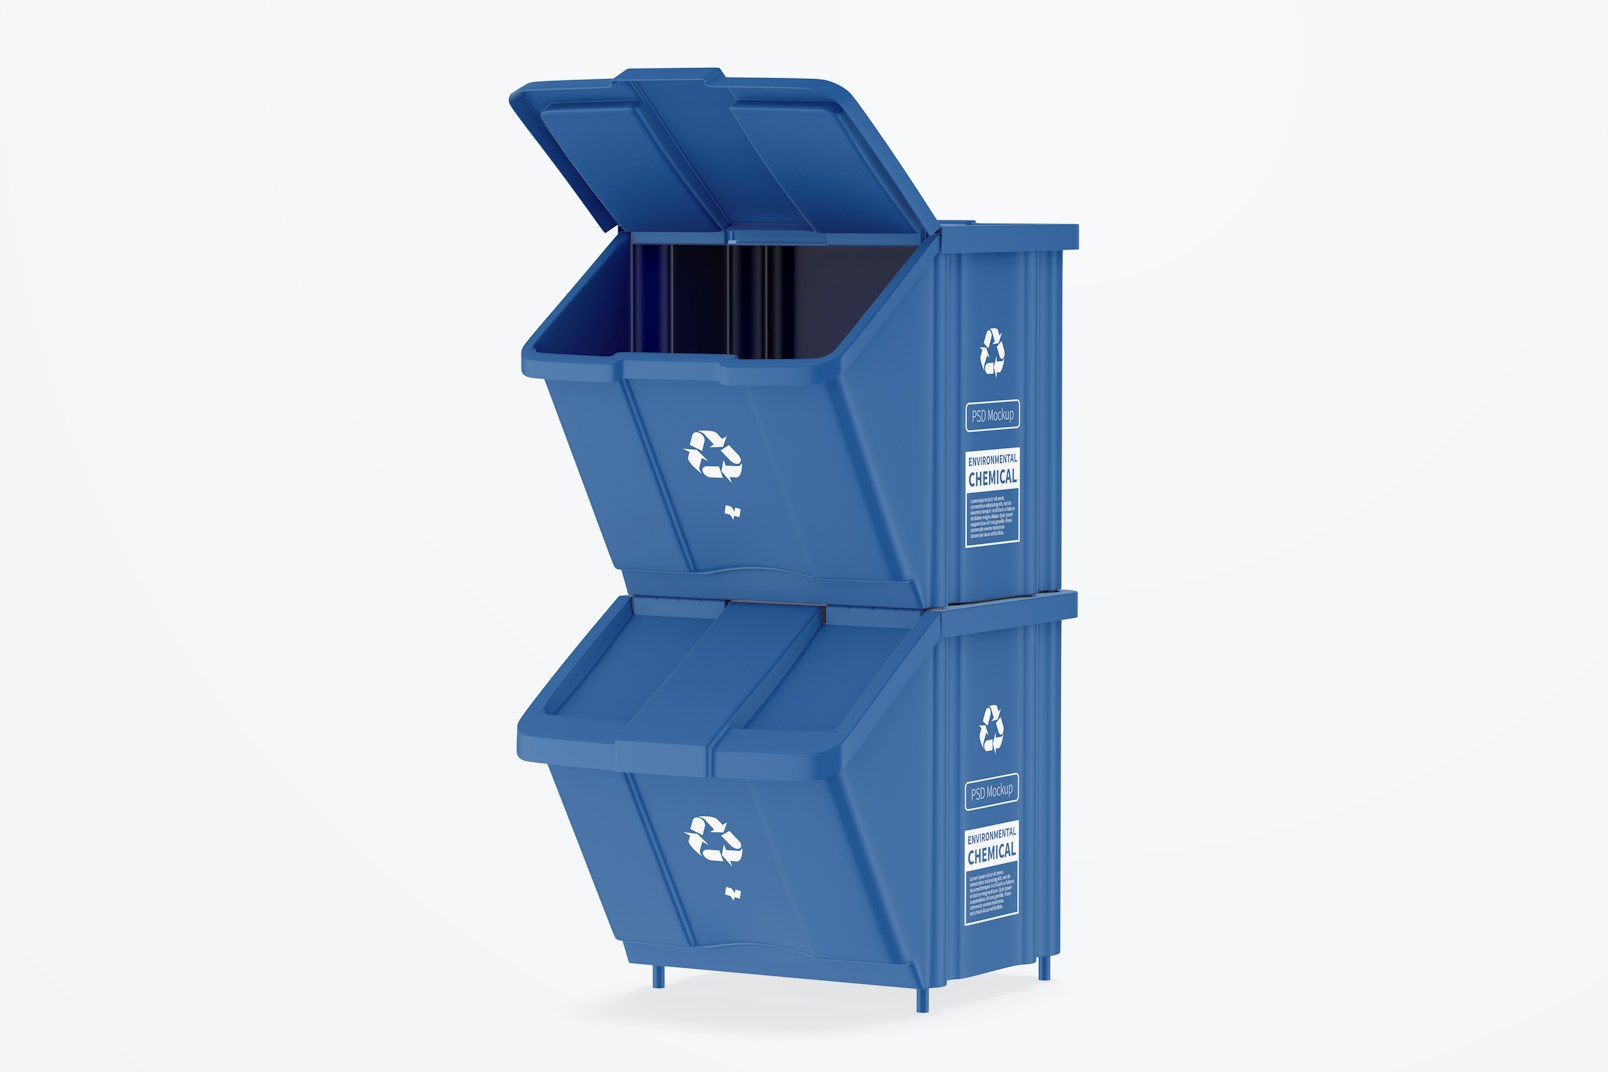 Bin Kit with Lid Mockup, Stacked